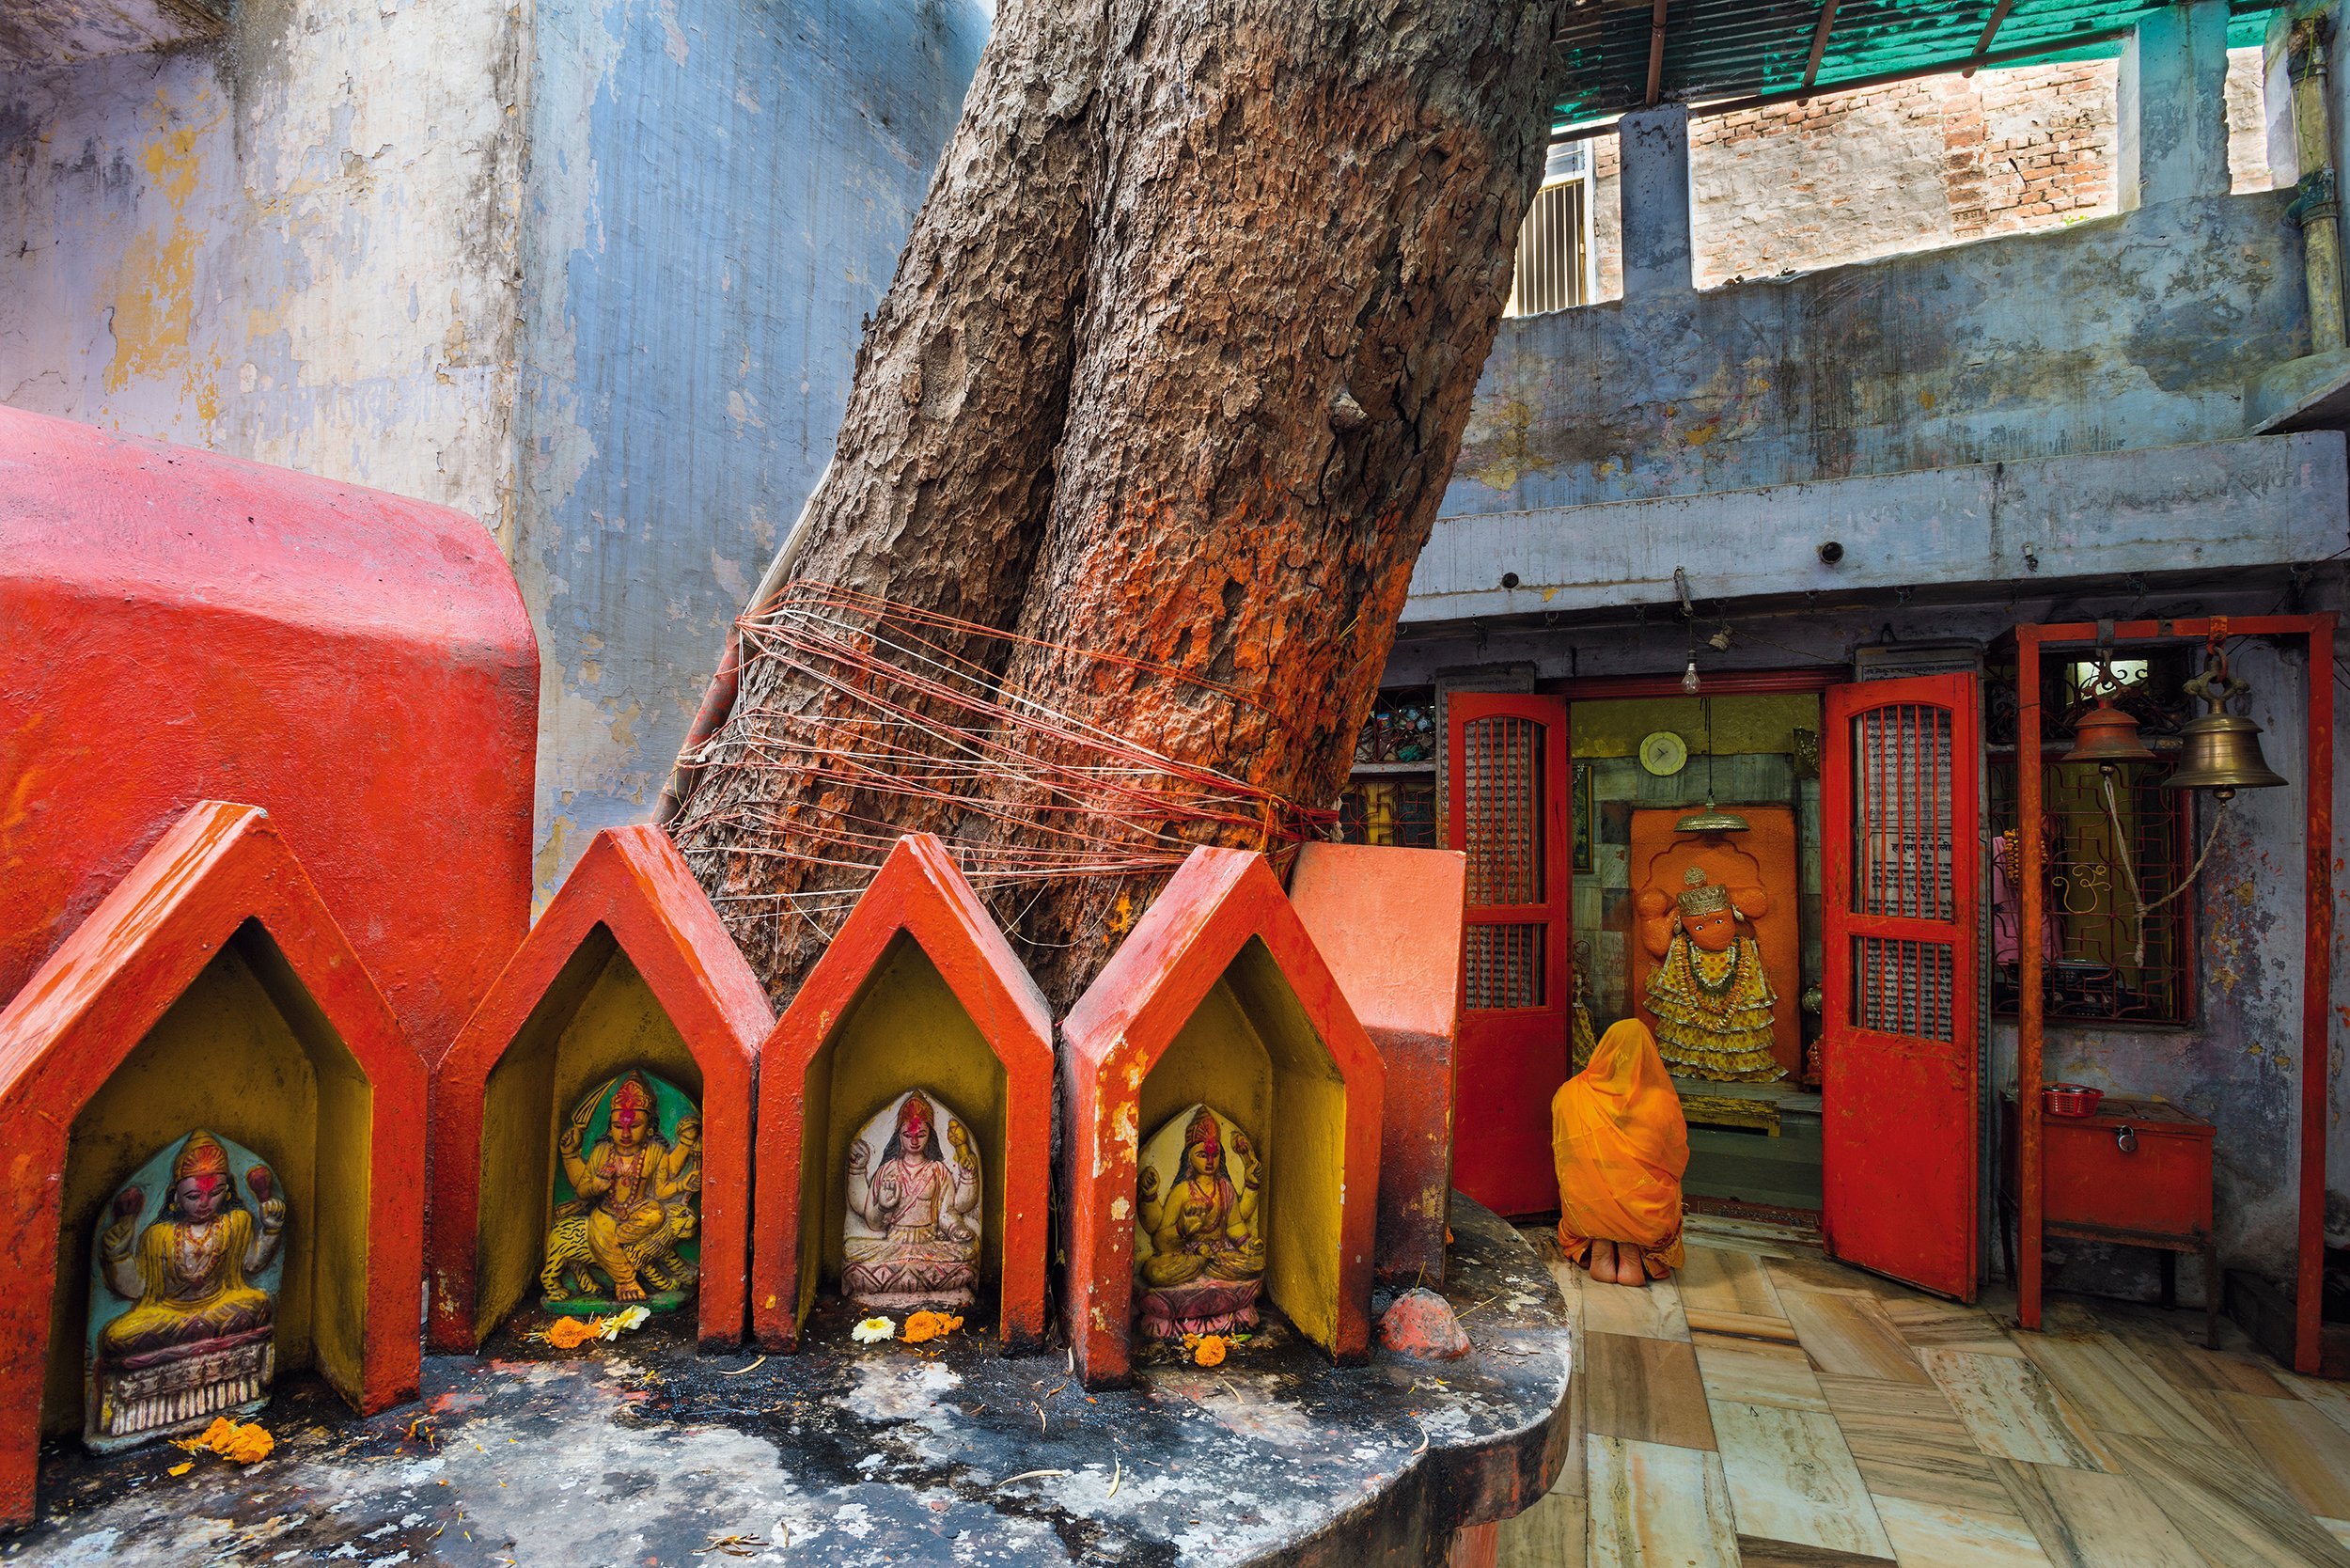 Image of a Hanuman temple in Varanasi, from the book 'Wise Trees' by Diana Cook and Len Jenshel